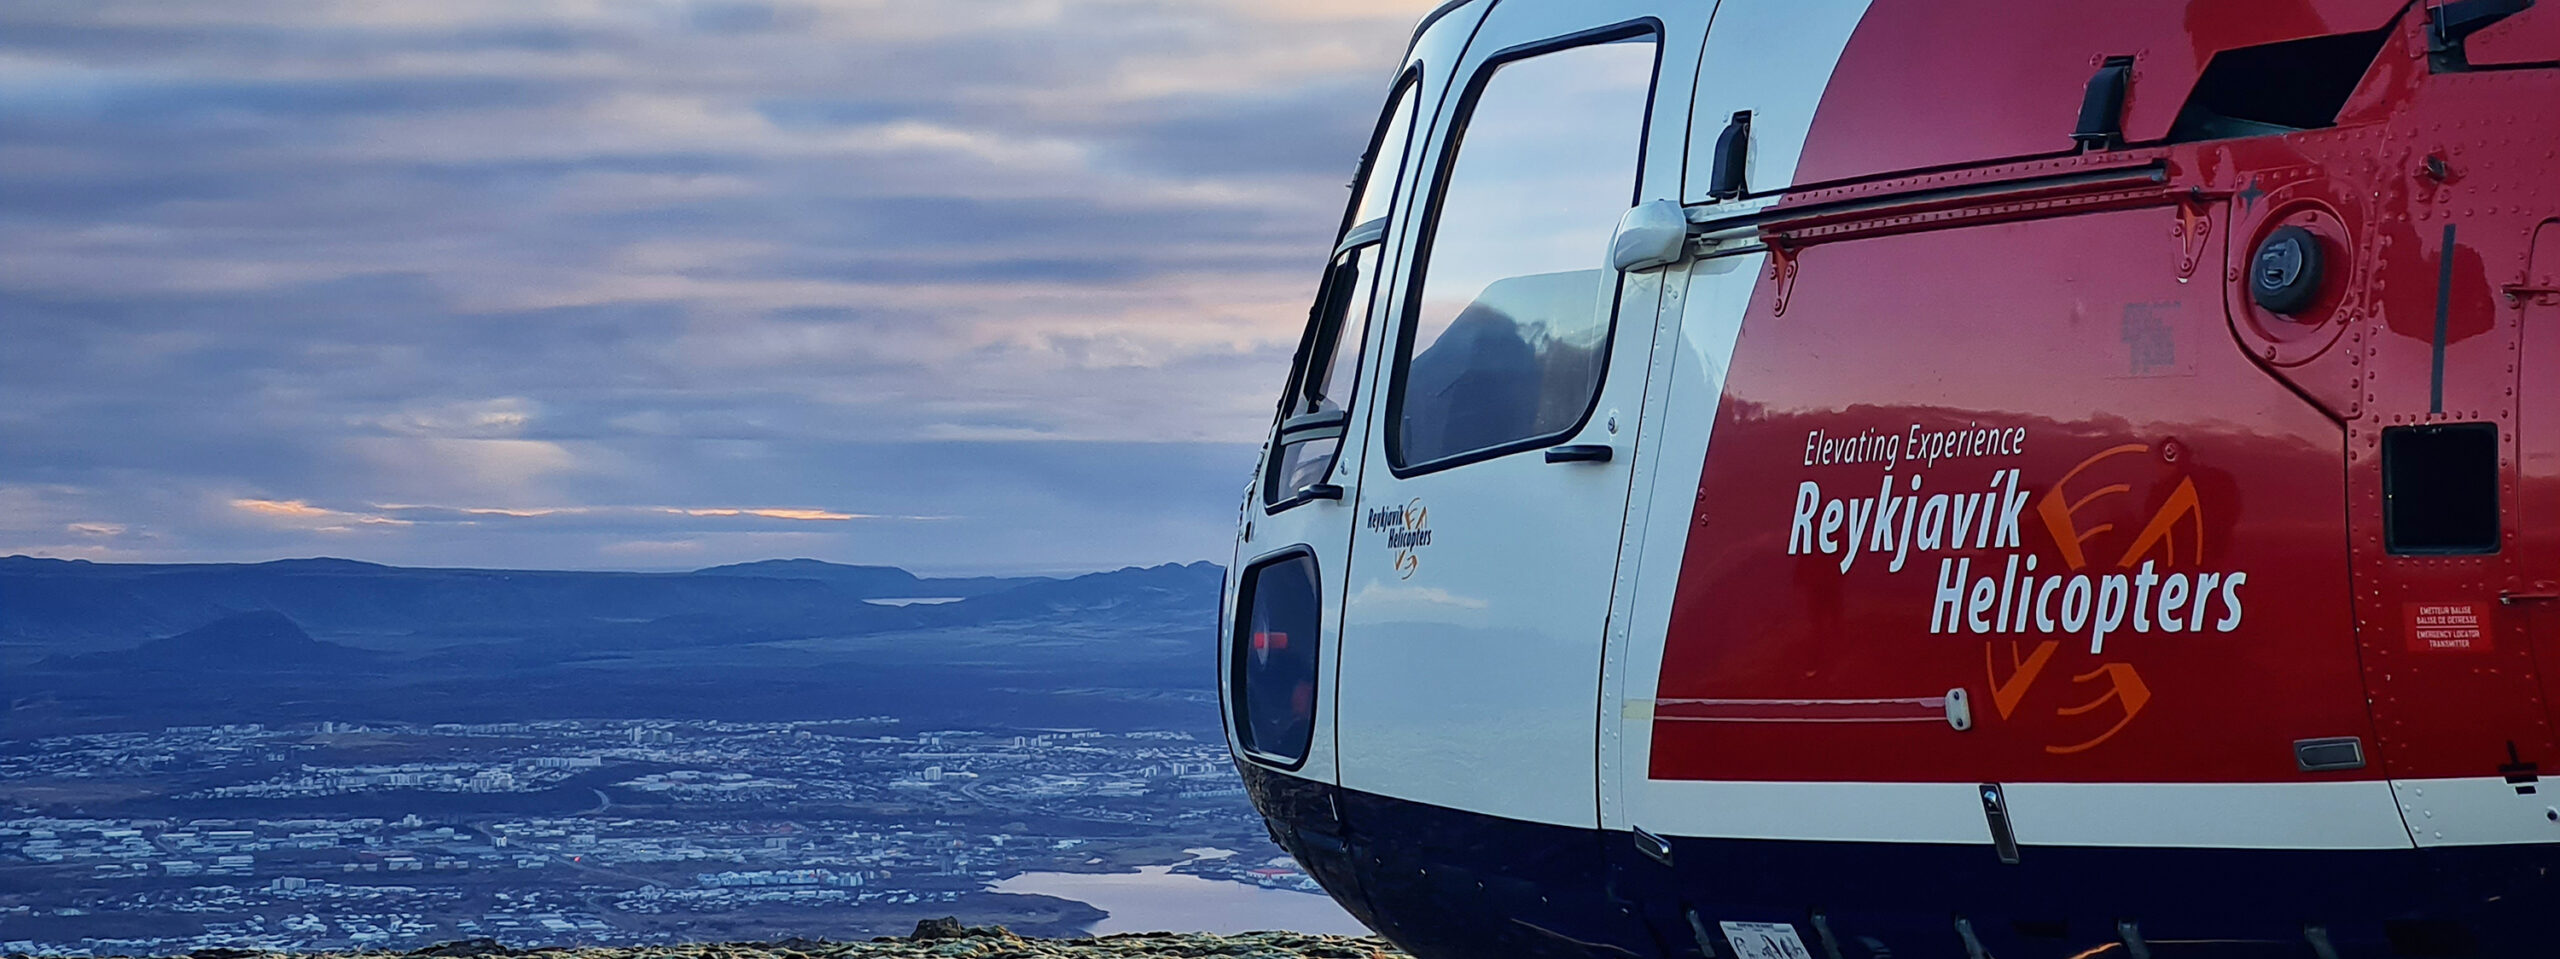 Reykjavik Helicopter Tour with Reykjavik Helicopters